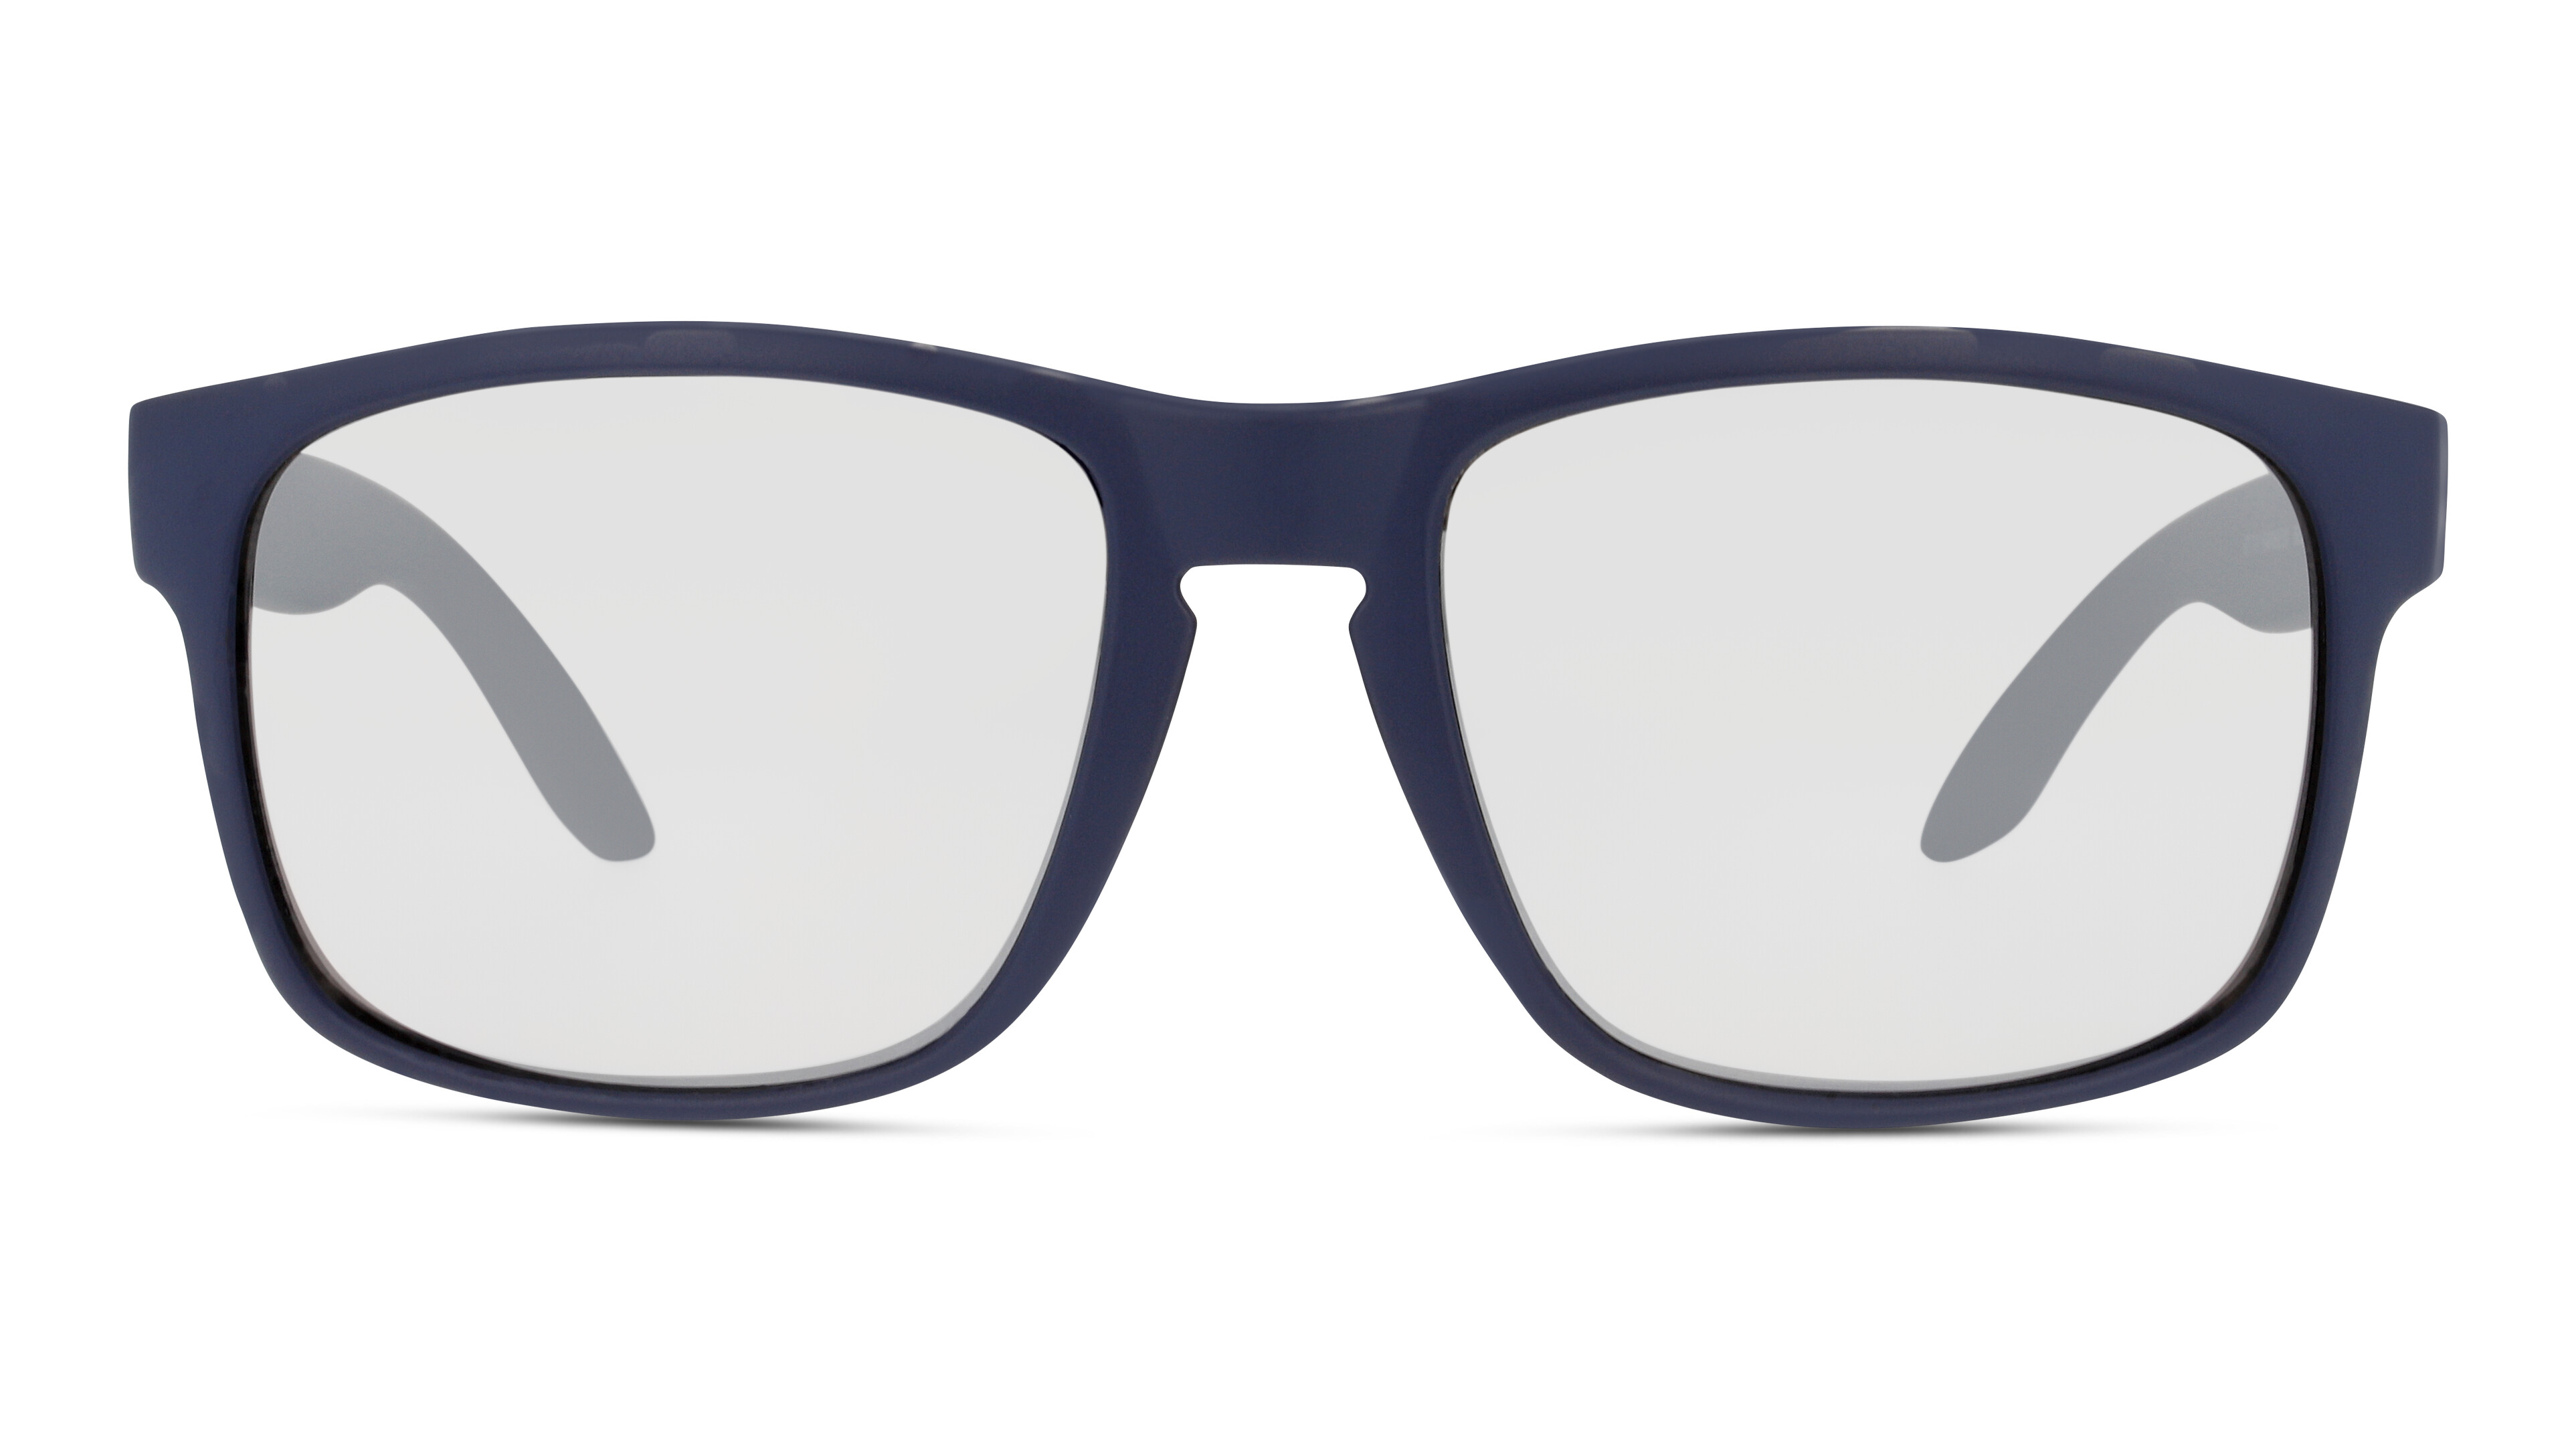 [products.image.front] Seen SNSM0006 CCGS Sonnenbrille